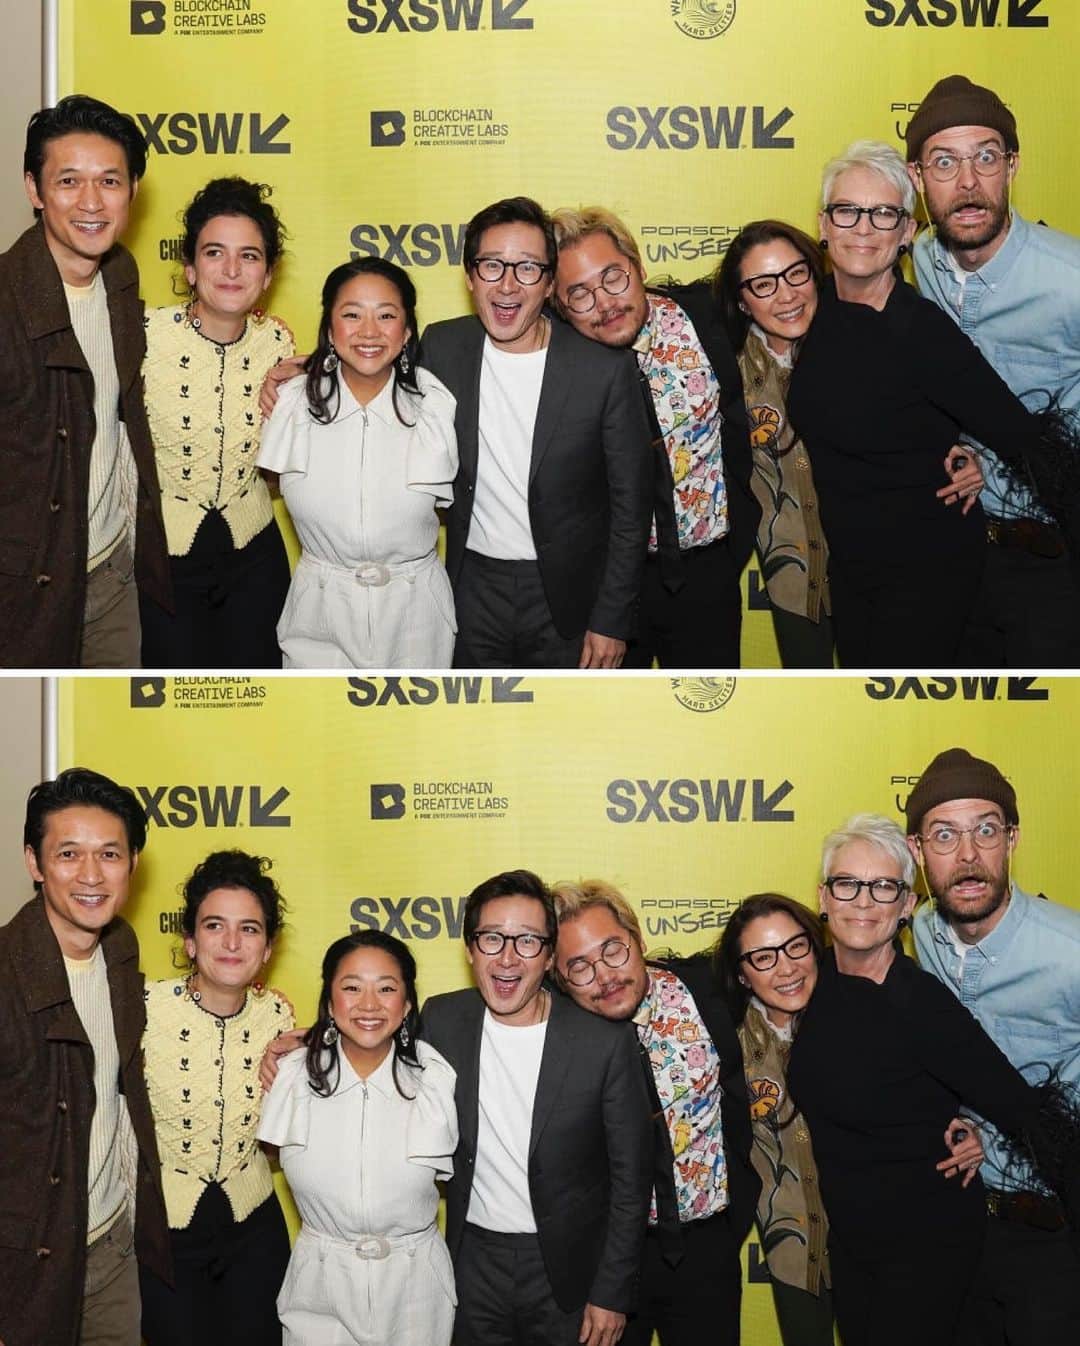 ハリー・シャム・ジュニアのインスタグラム：「Been a year since our movie premiered at @sxsw I like to think that today is the unofficial wrap party for @everythingeverywheremovie since we didn't get a proper one after the movie wrapped on the day the world wide pandemic started. A wrap party at the Oscar's @theacademy Pretty neat. Getting to work alongside with not only some of the most talented folks but THE ABSOLUTE KINDEST HUMANS.  @michelleyeoh_official @kehuyquan @jamieleecurtis @stephaniehsuofficial @thejameshong @jennyslate @talliemedel @brianle_official @andyle_official @dunkwun @wongspelledwang @son_lux @shirleykurata @michellechung13 @hamer_fx @timvswild My heart burst into a puddled mess when I think about these little tiny specs that came together to get us to this place where we get to celebrate movie excellence. But what I really want to celebrate is having a movie like this, made by a group of people that not only care deeply about the work but also how they treat each other, their crew, actors and fans. It starts at the top and proof that you can make a very special movie by being kind, generous and give opportunities to one's who have been on the sidelines for far too long. Whatever the night brings- I'm so damn grateful to be part of this film family. It's an honor to have been on this #EEAAO journey. READY TO PARTY, DANCE AND CELEBRATE ALL THE NOMINEES TONIGHT!!! *the last slide is when we were workshopping Chad’s movement controlled by Raccacoonie 🦝 Photo Credit: @kylechristy」